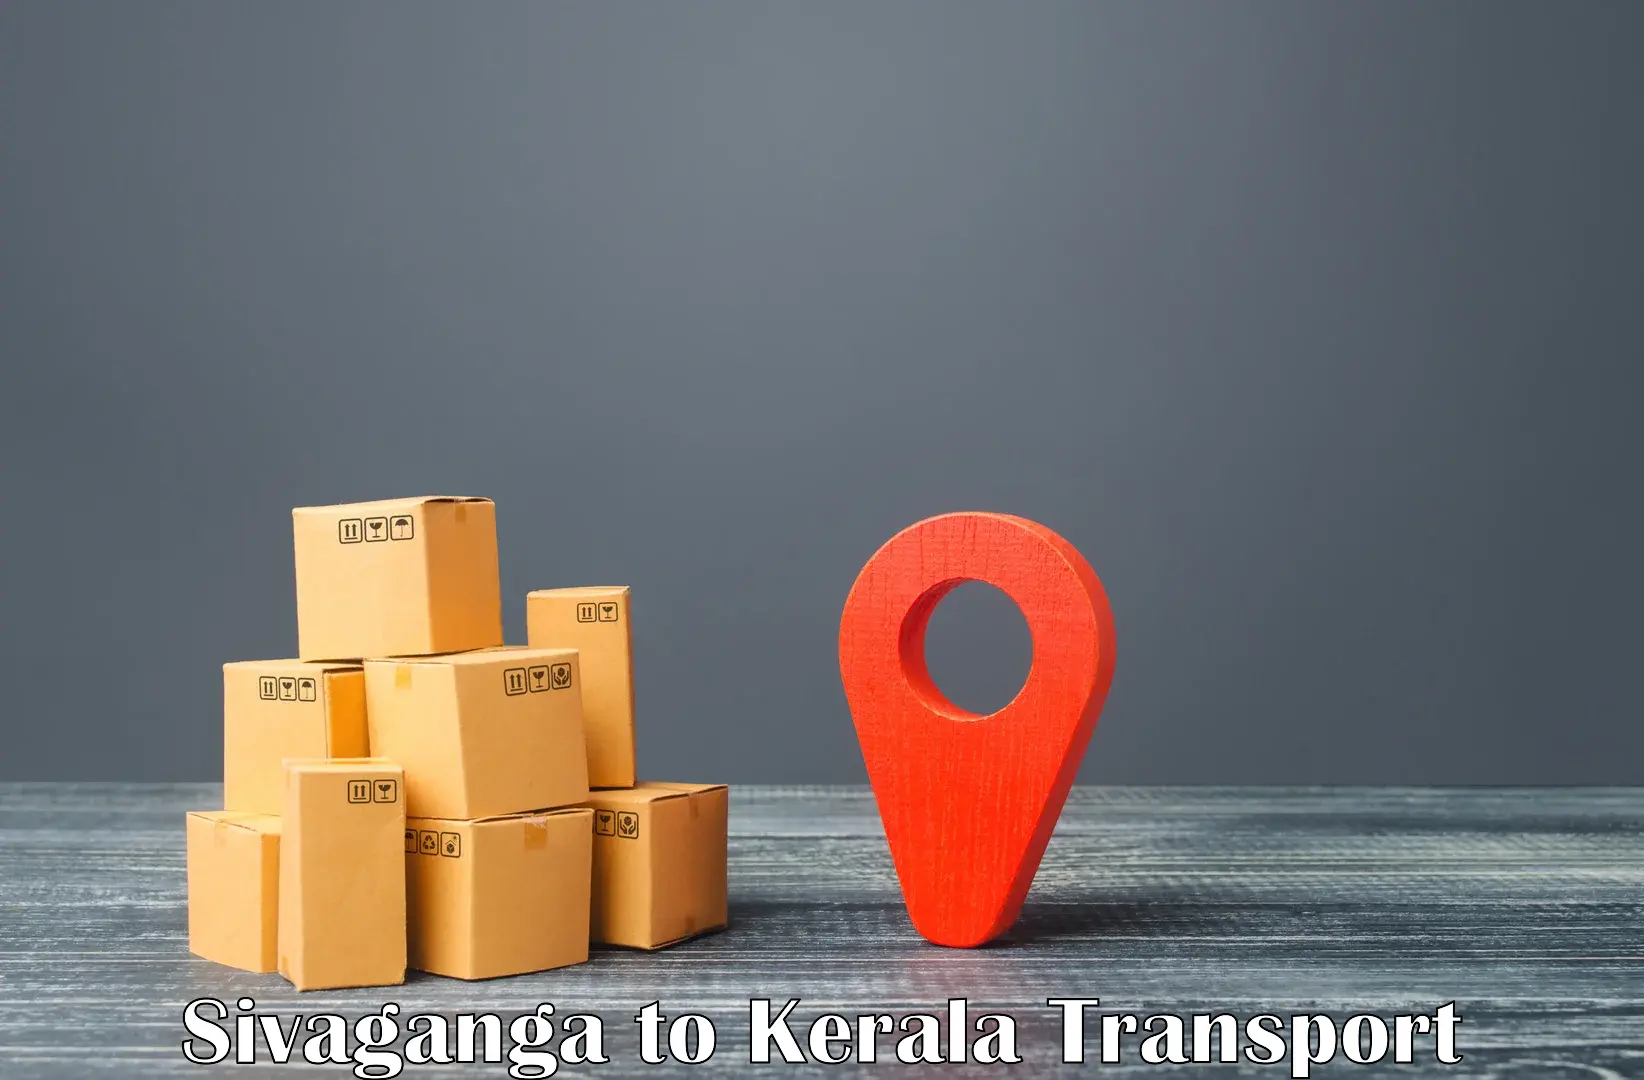 Road transport online services Sivaganga to Koyilandy